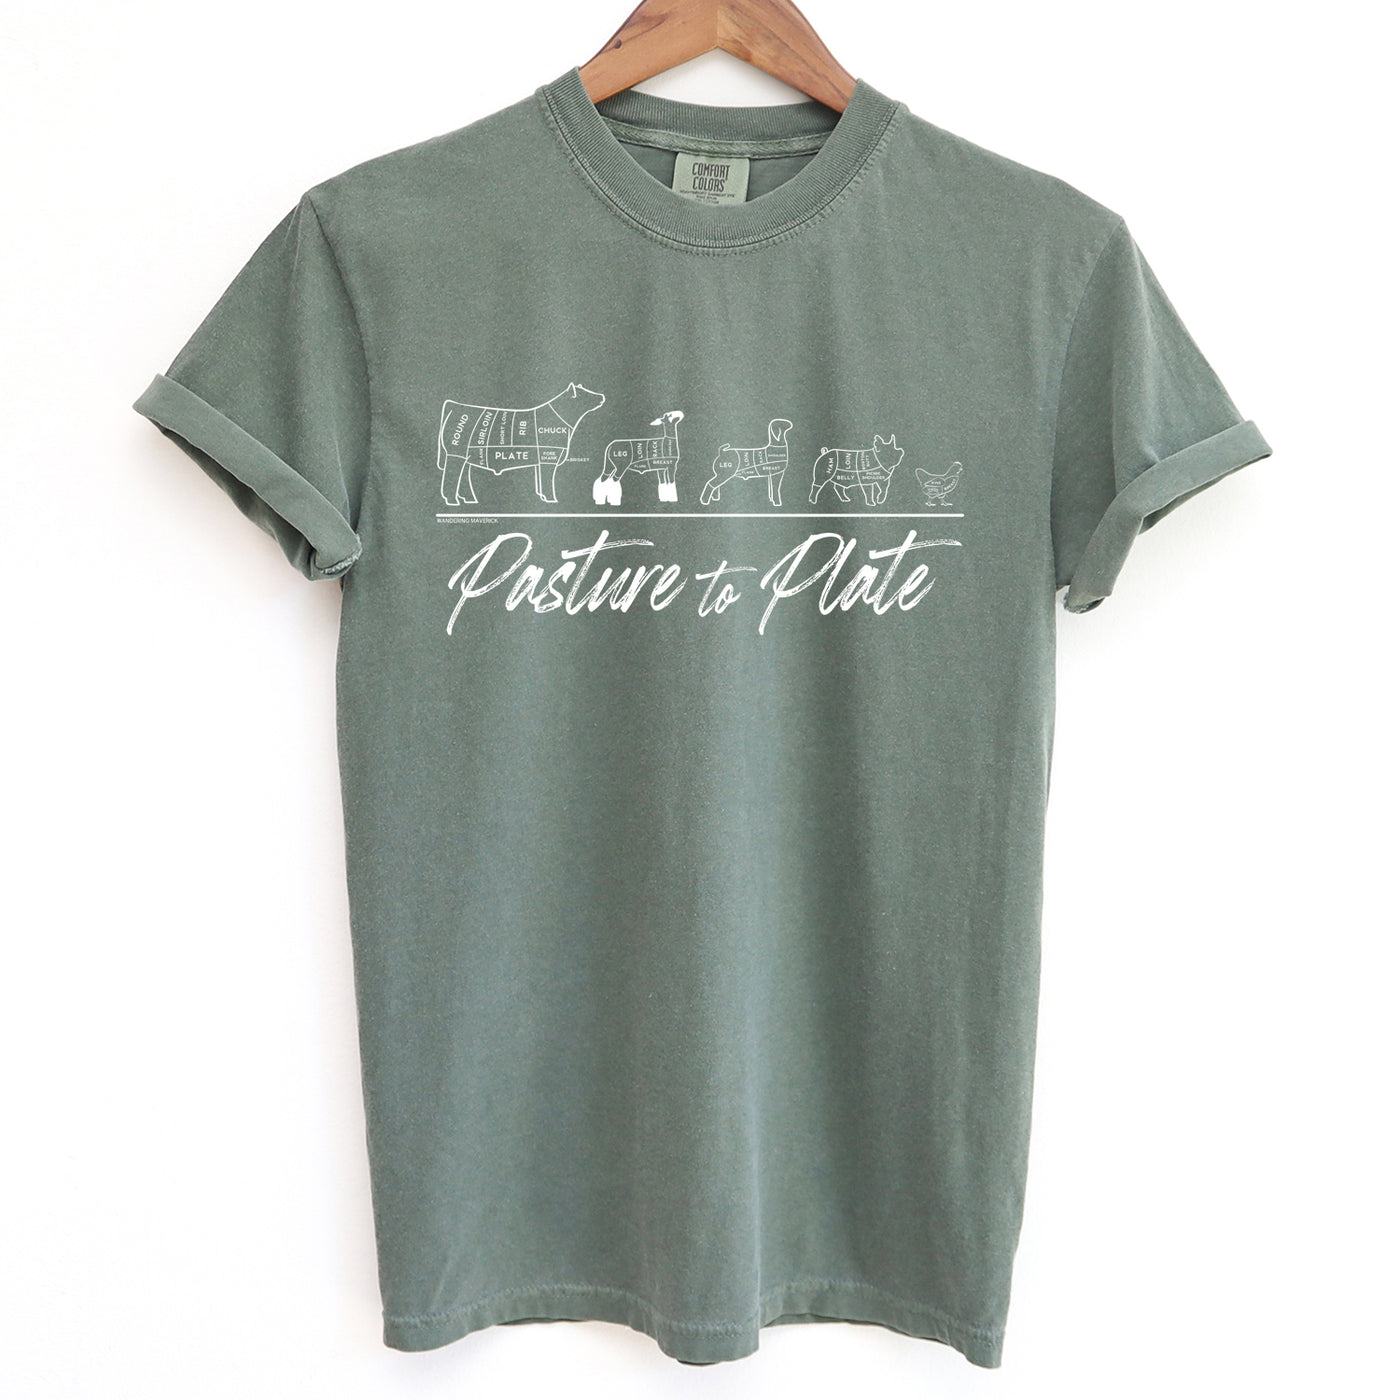 Pasture To Plate - White Ink ComfortWash/ComfortColor T-Shirt (S-4XL) - Multiple Colors!